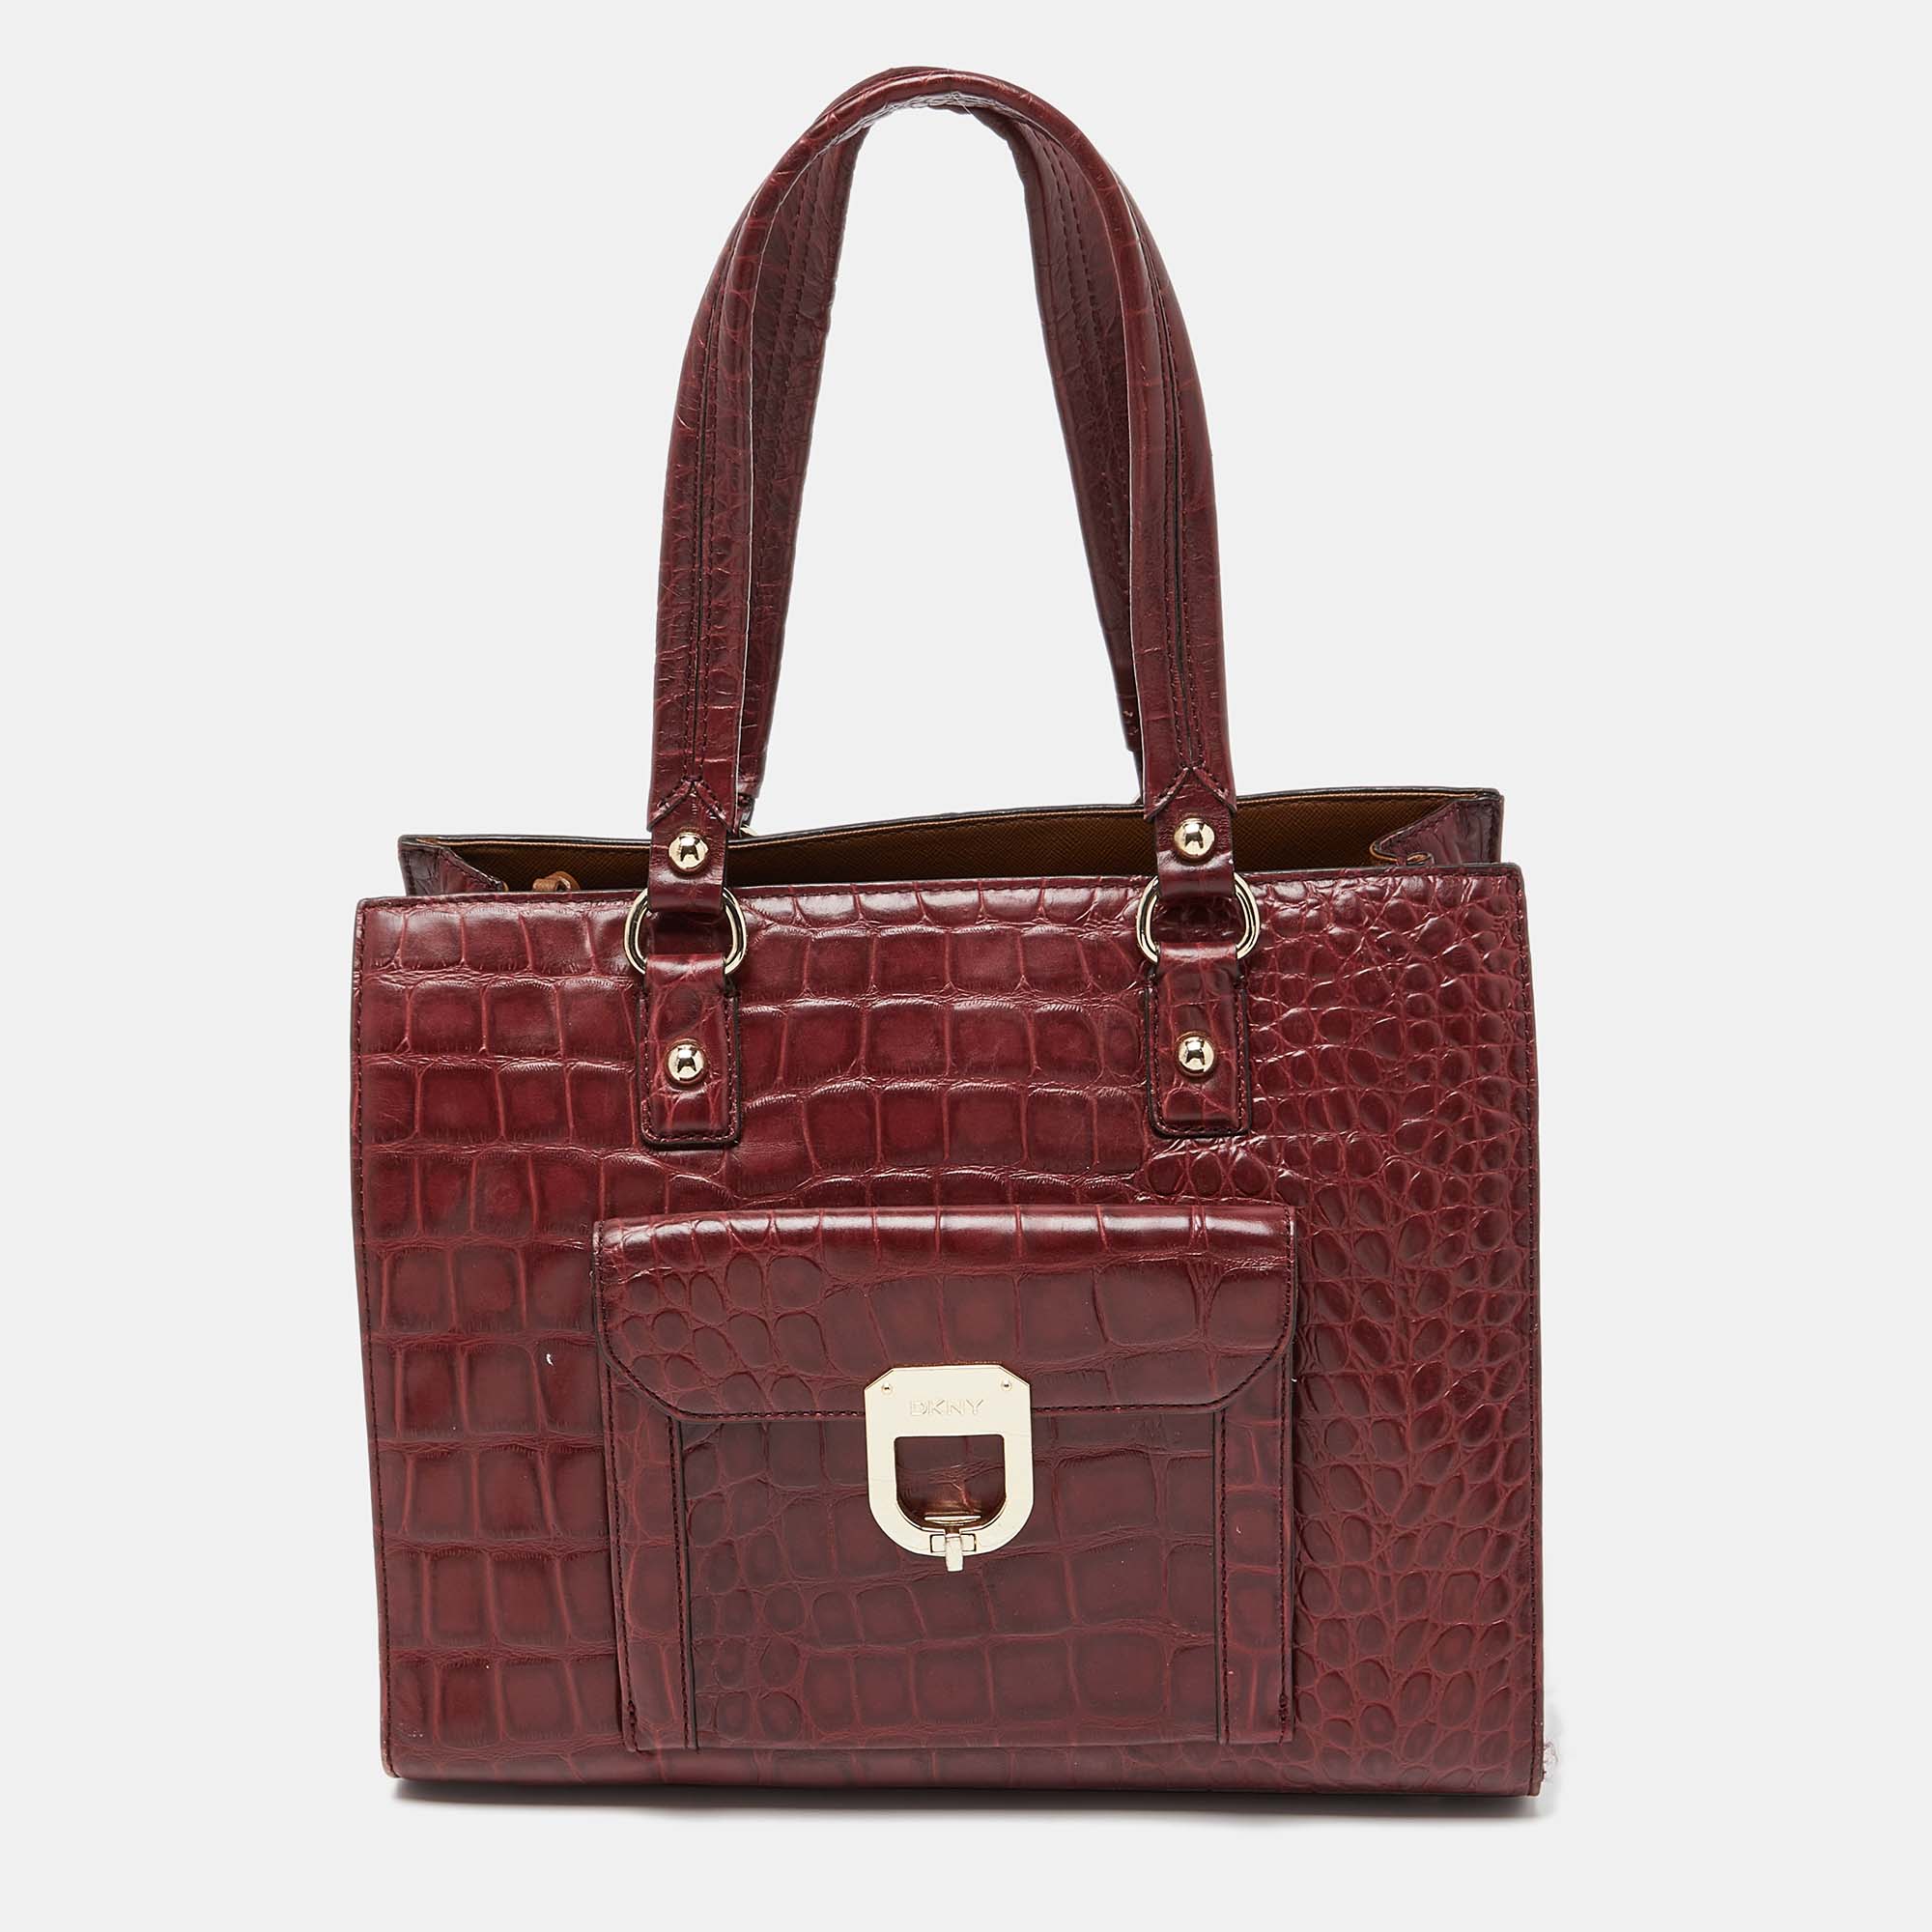 Pre-owned Dkny Burgundy Croc Embossed Leather Tote